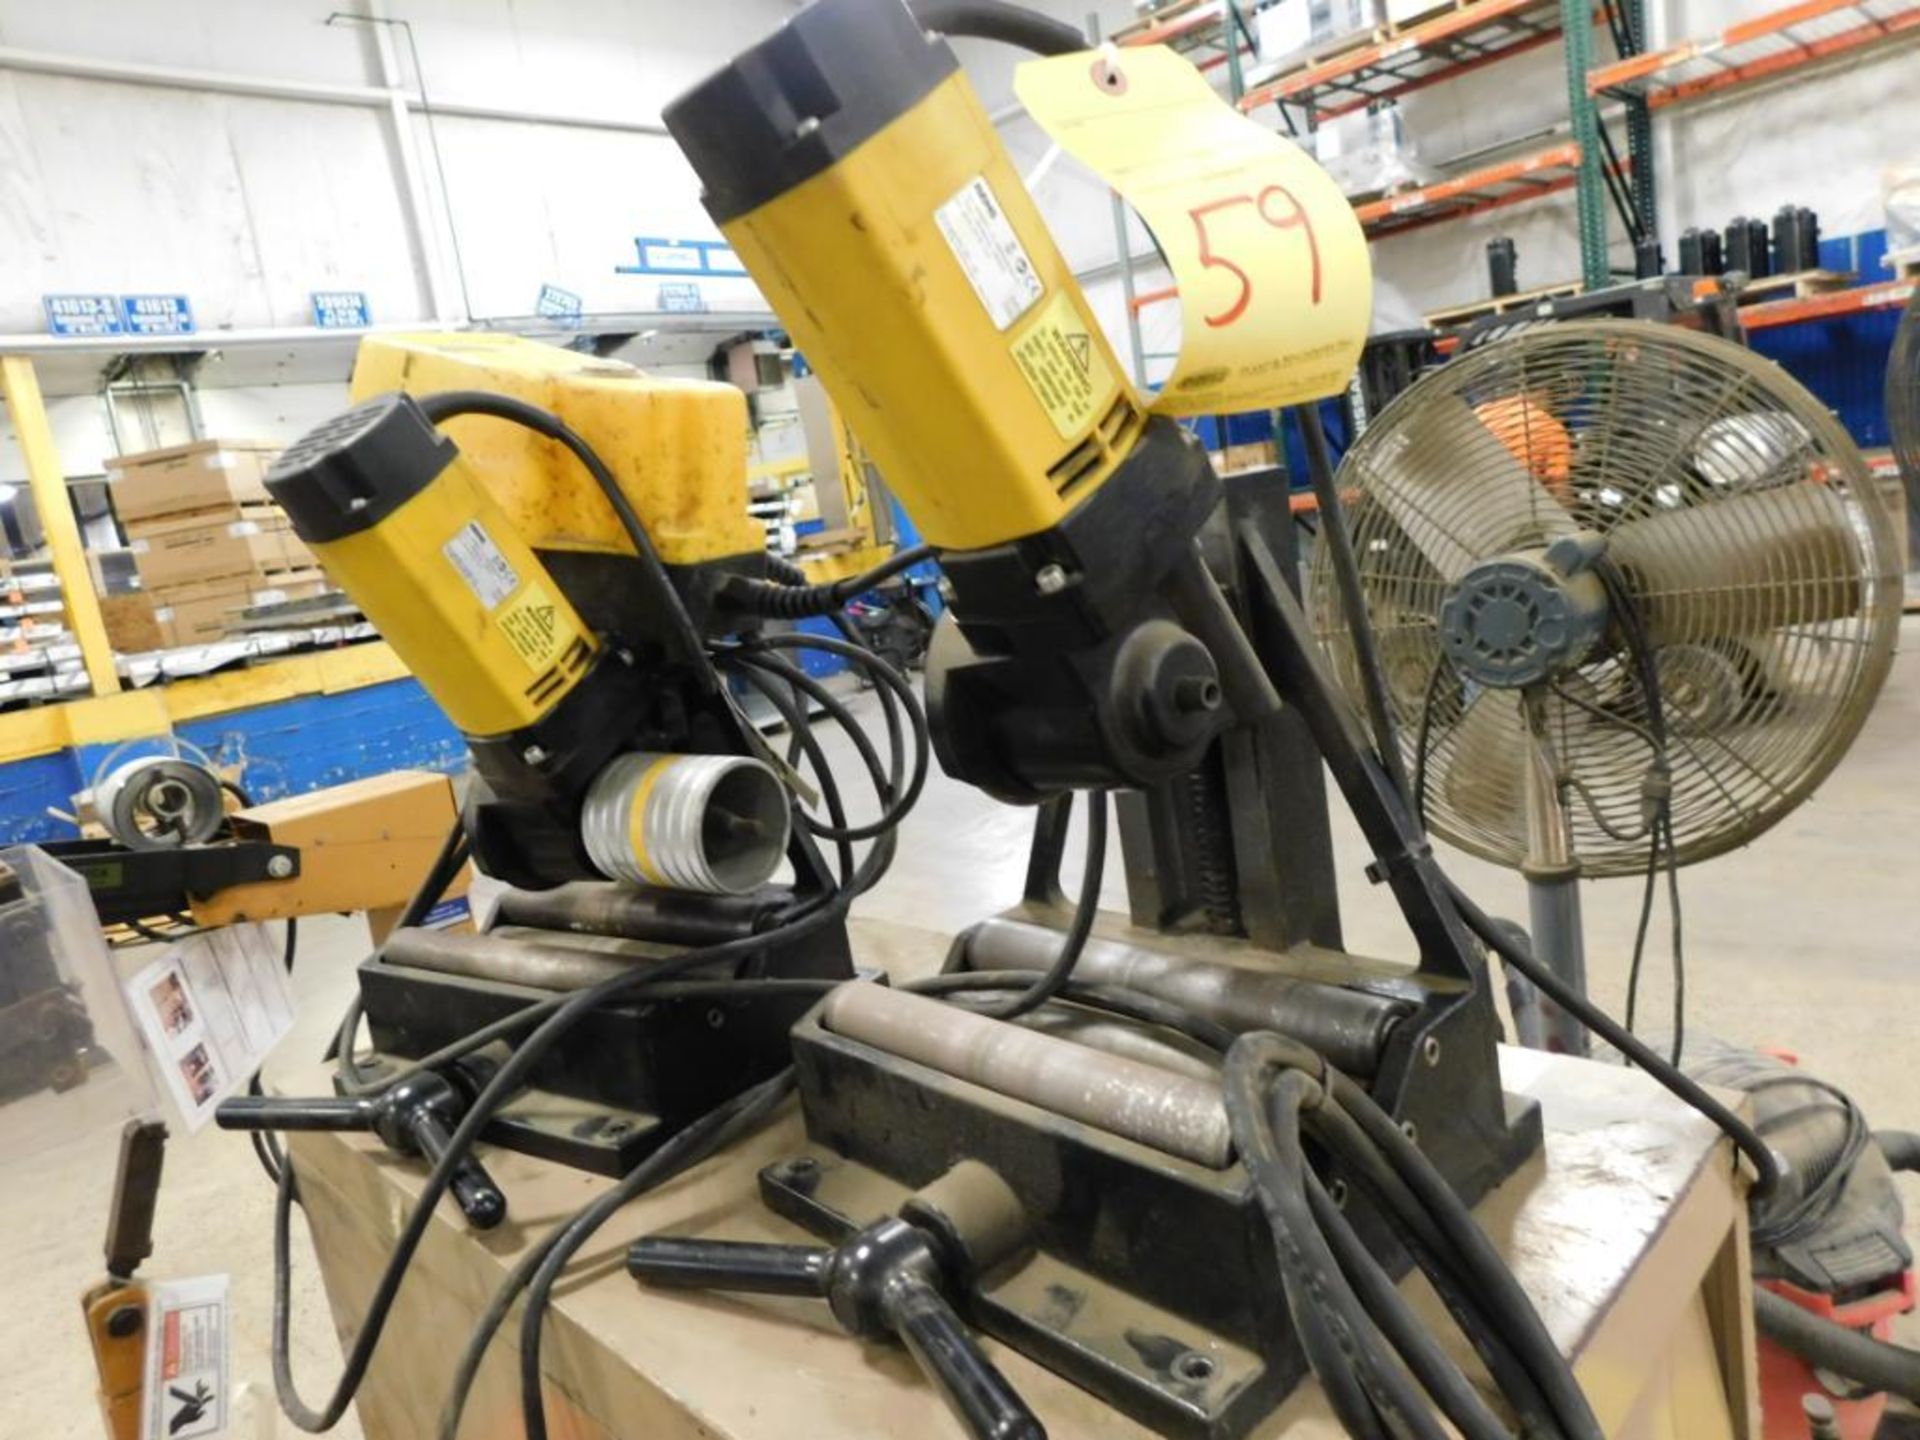 LOT OF ELECTRIC TUBING CUTTERS (2), REMS